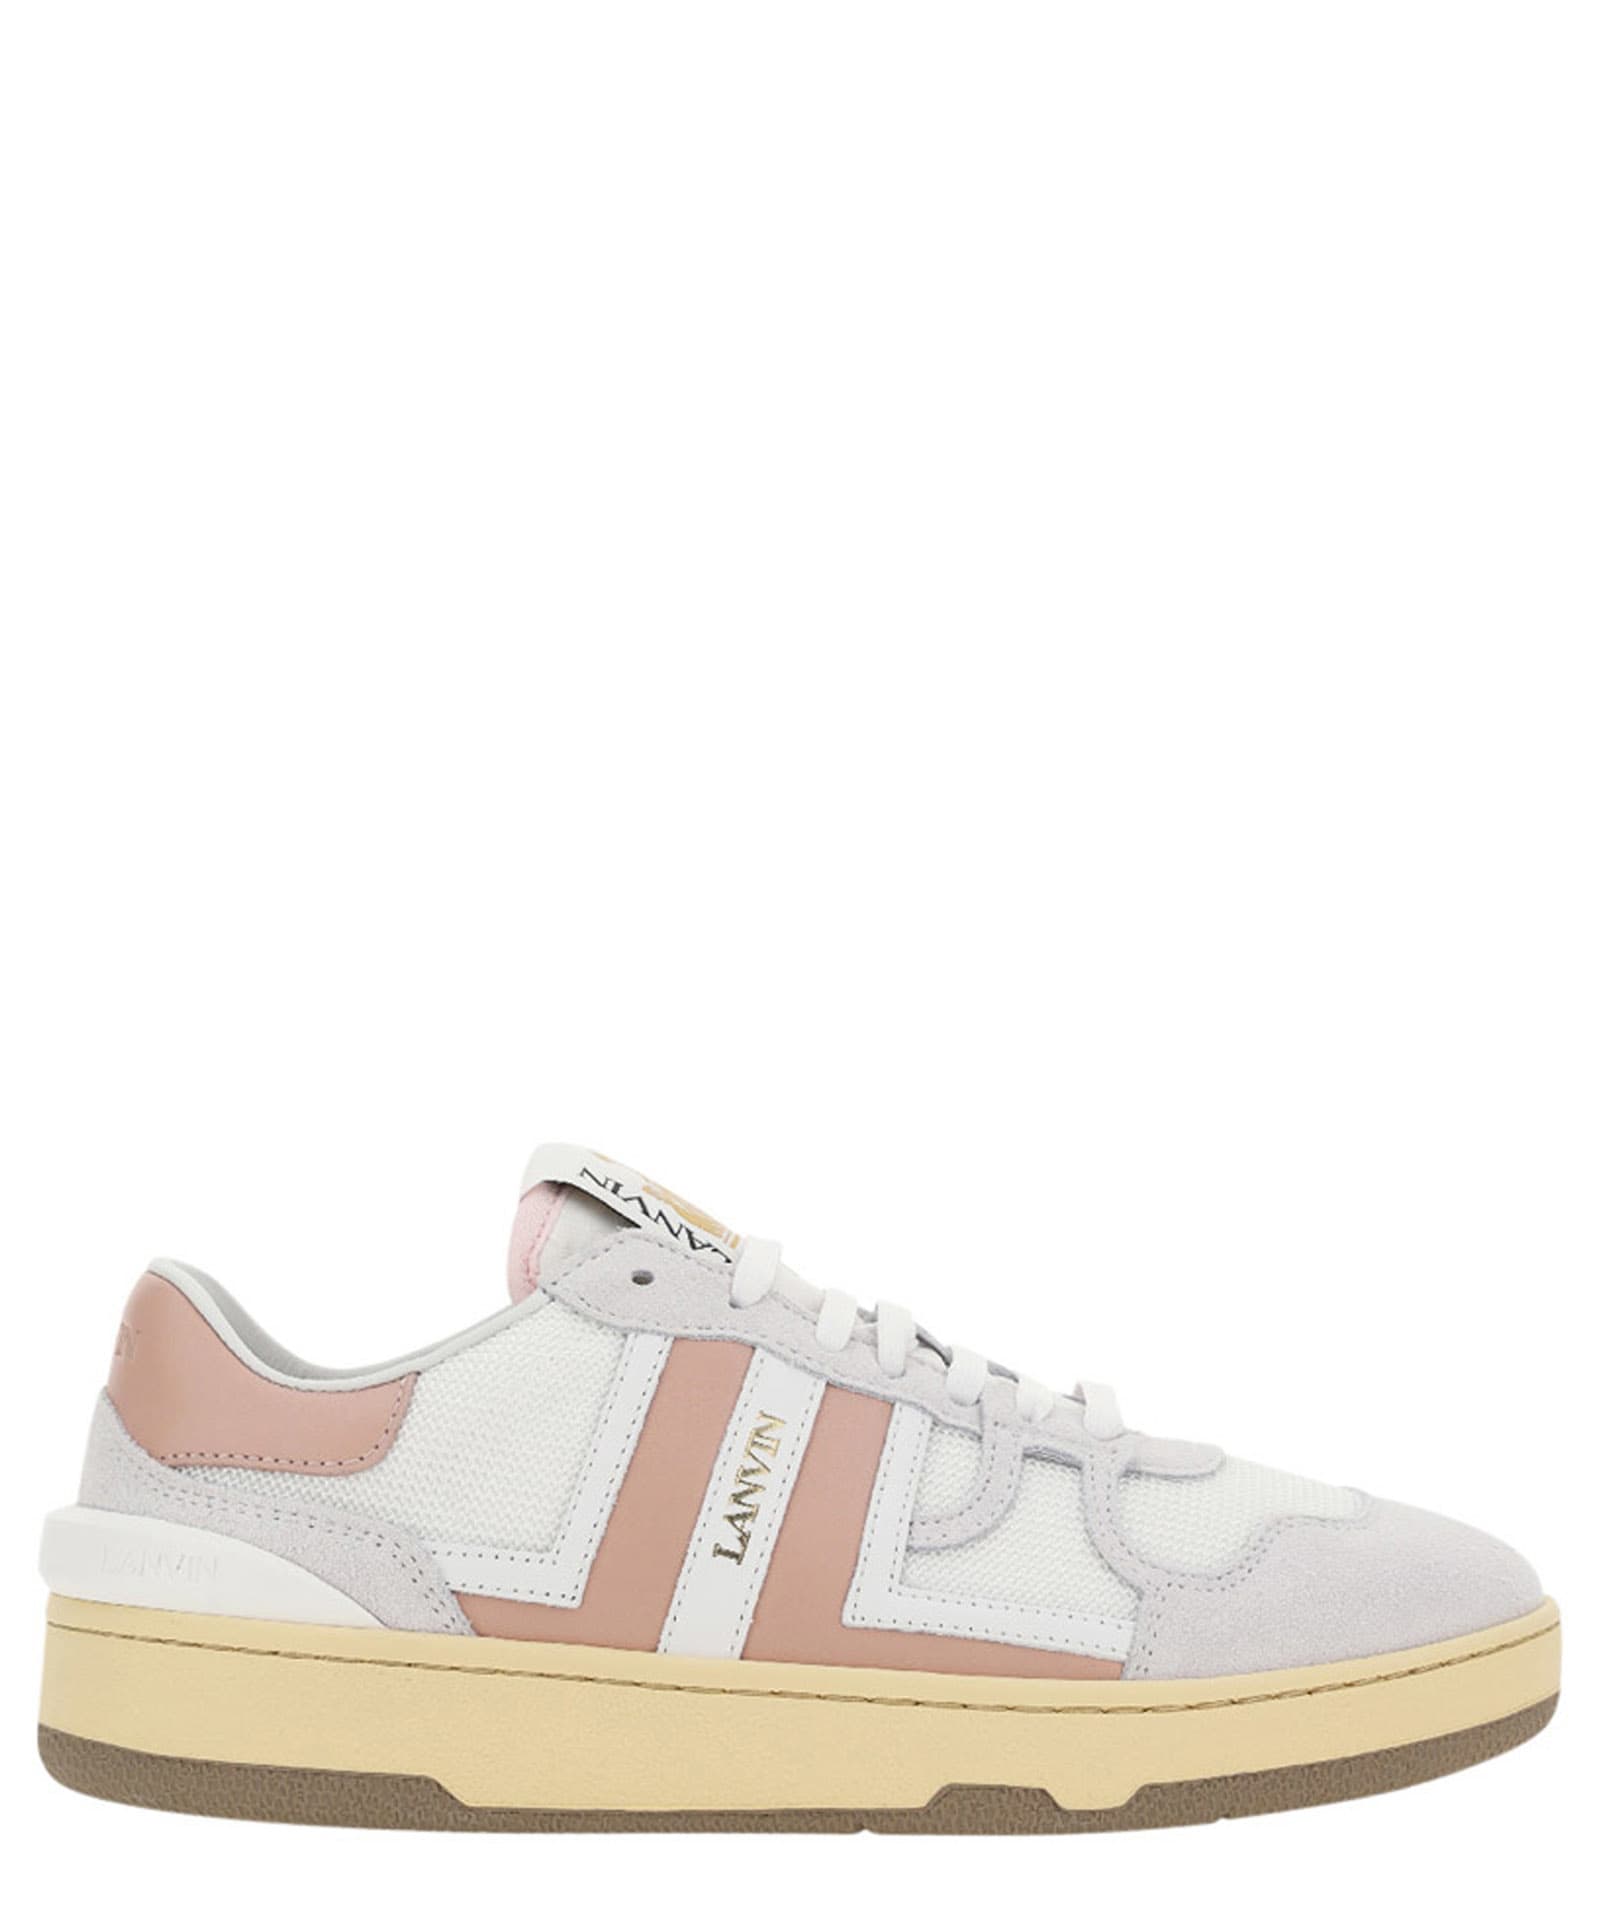 LANVIN CLAY LEATHER SNEAKERS